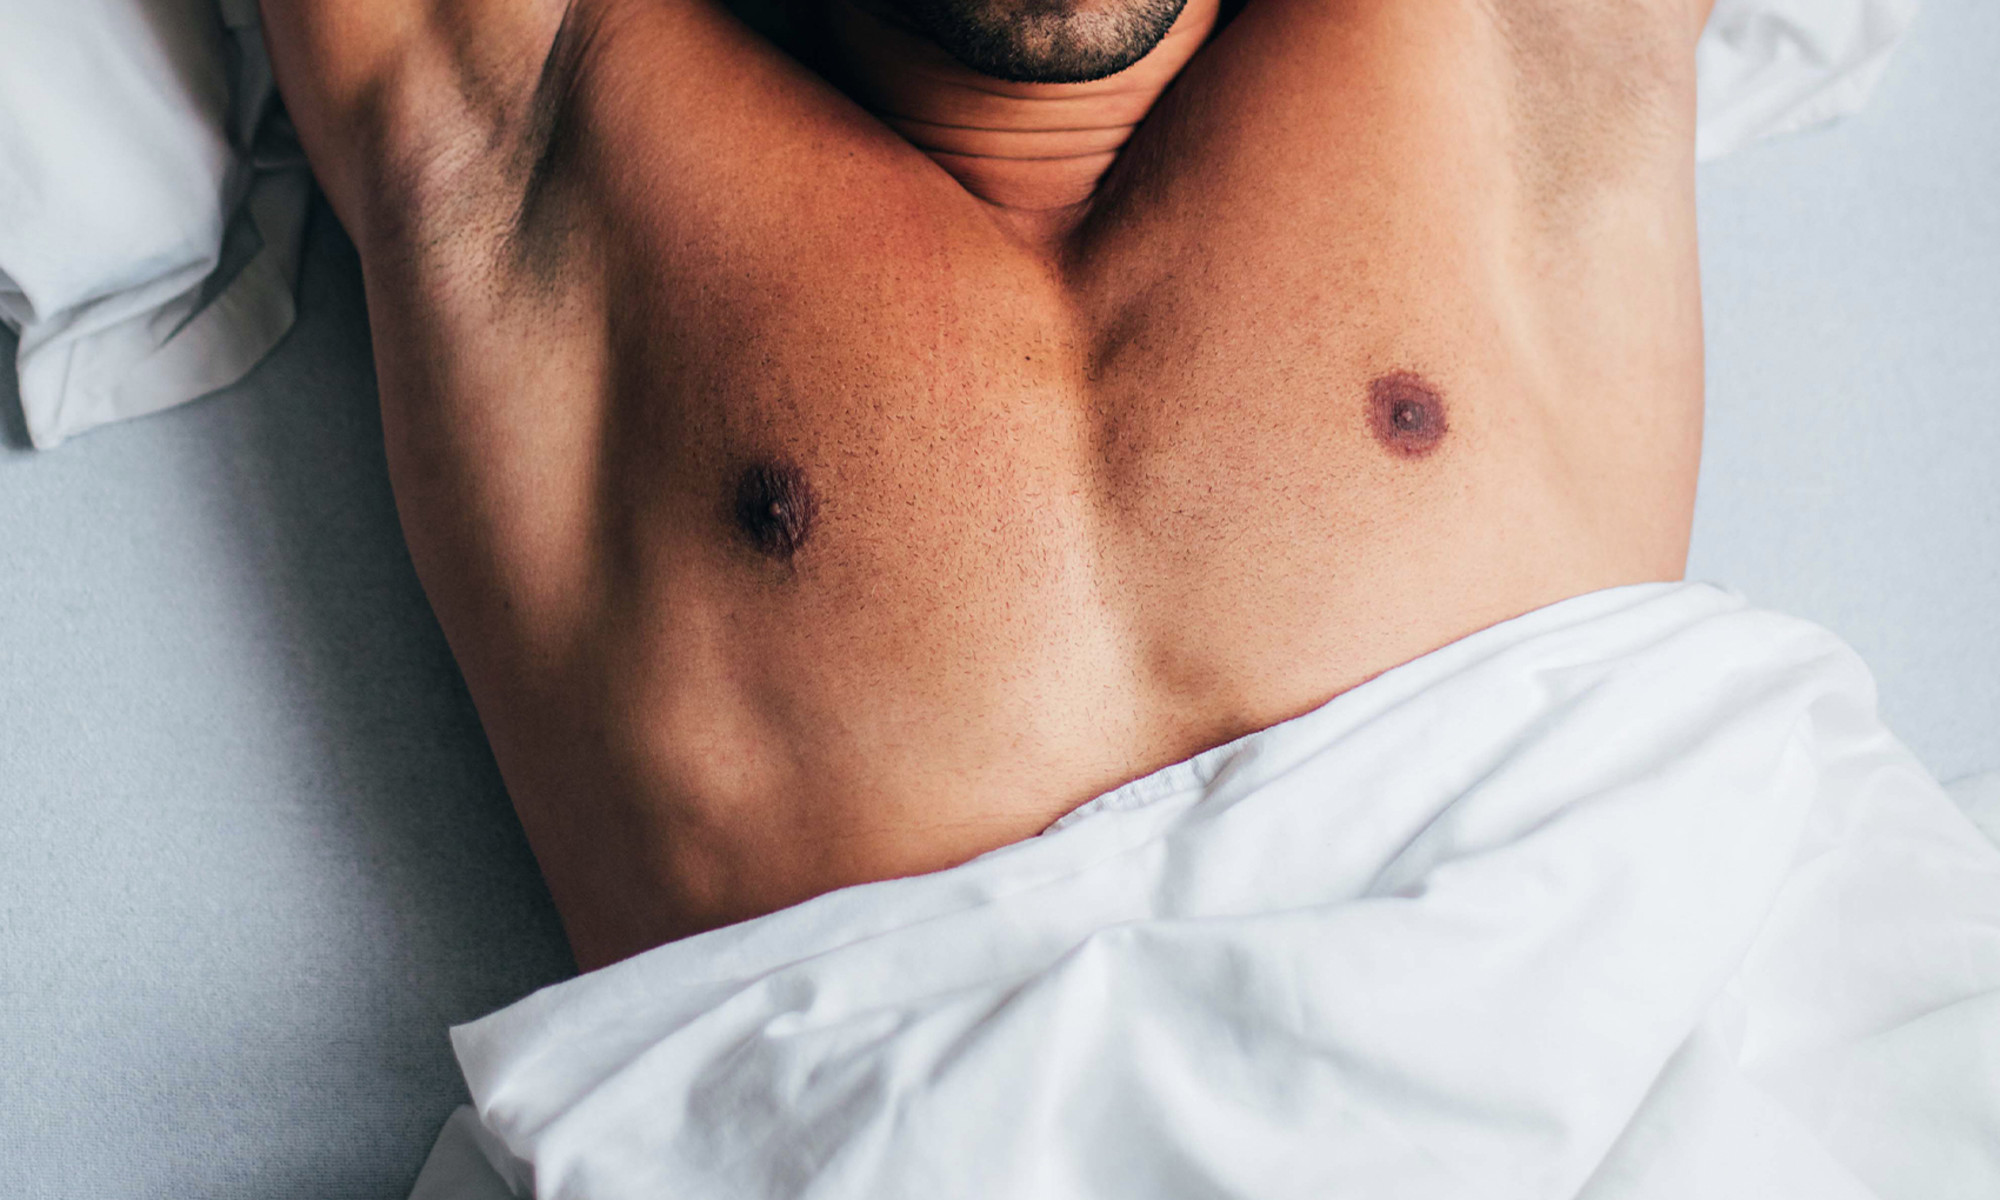 How To Use Male Nipple Play In Bed 17 Techniques and FAQs mindbodygreen picture